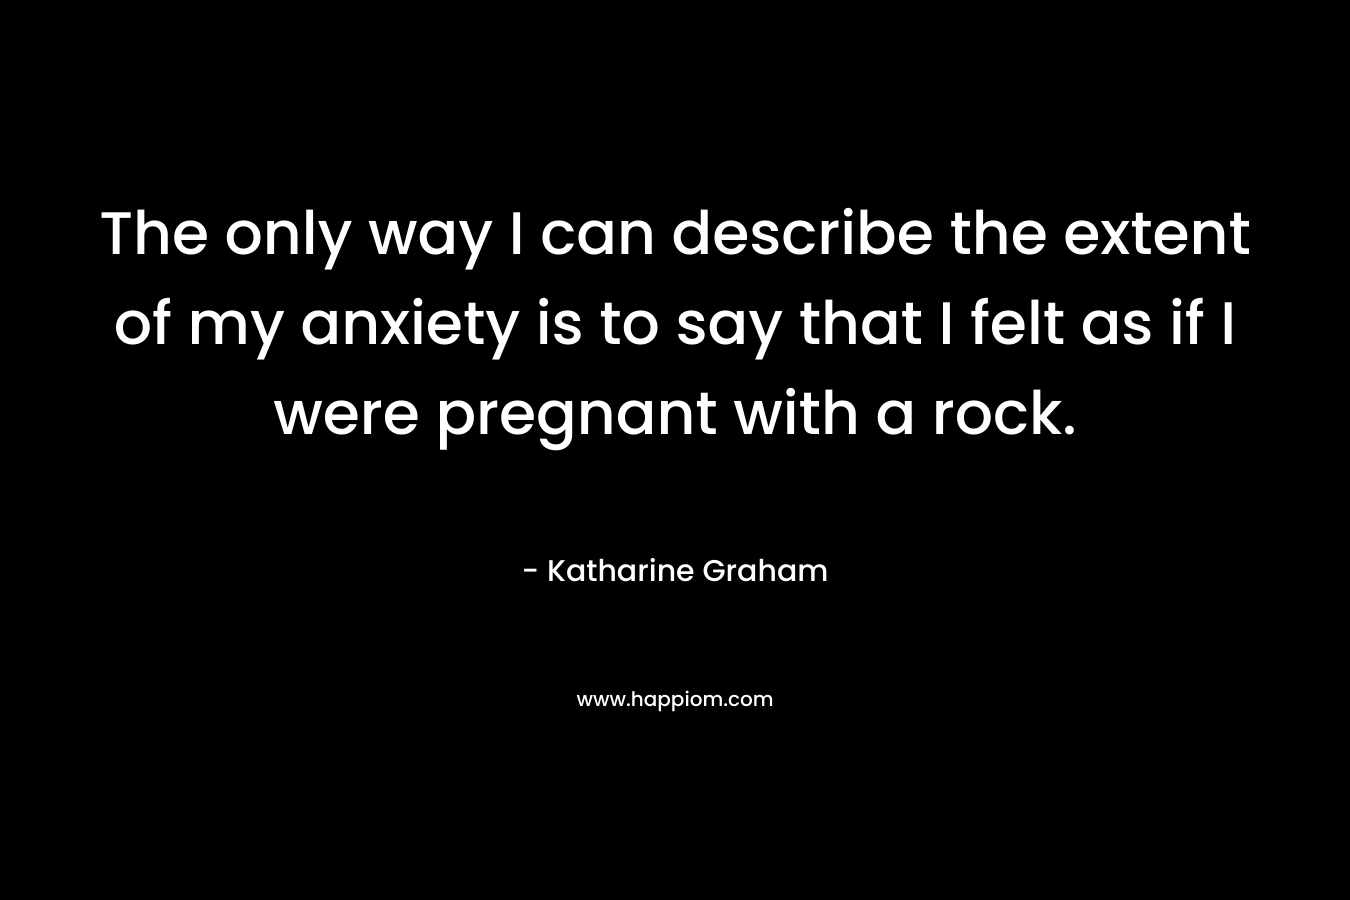 The only way I can describe the extent of my anxiety is to say that I felt as if I were pregnant with a rock. – Katharine Graham